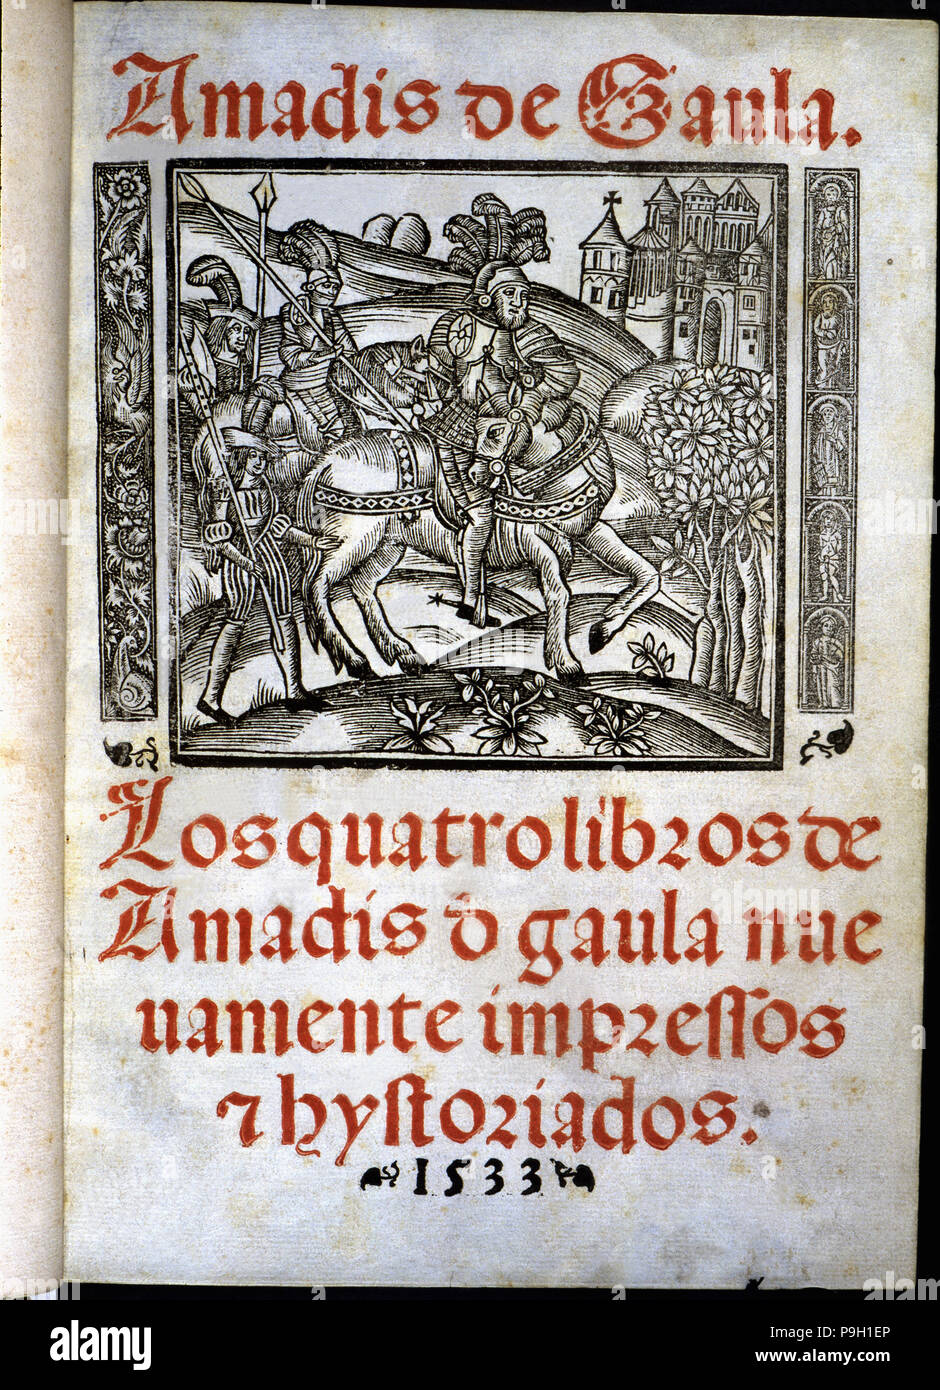 Cover of 'Amadis de Gaula', book of chivalry printed in 1533. Stock Photo